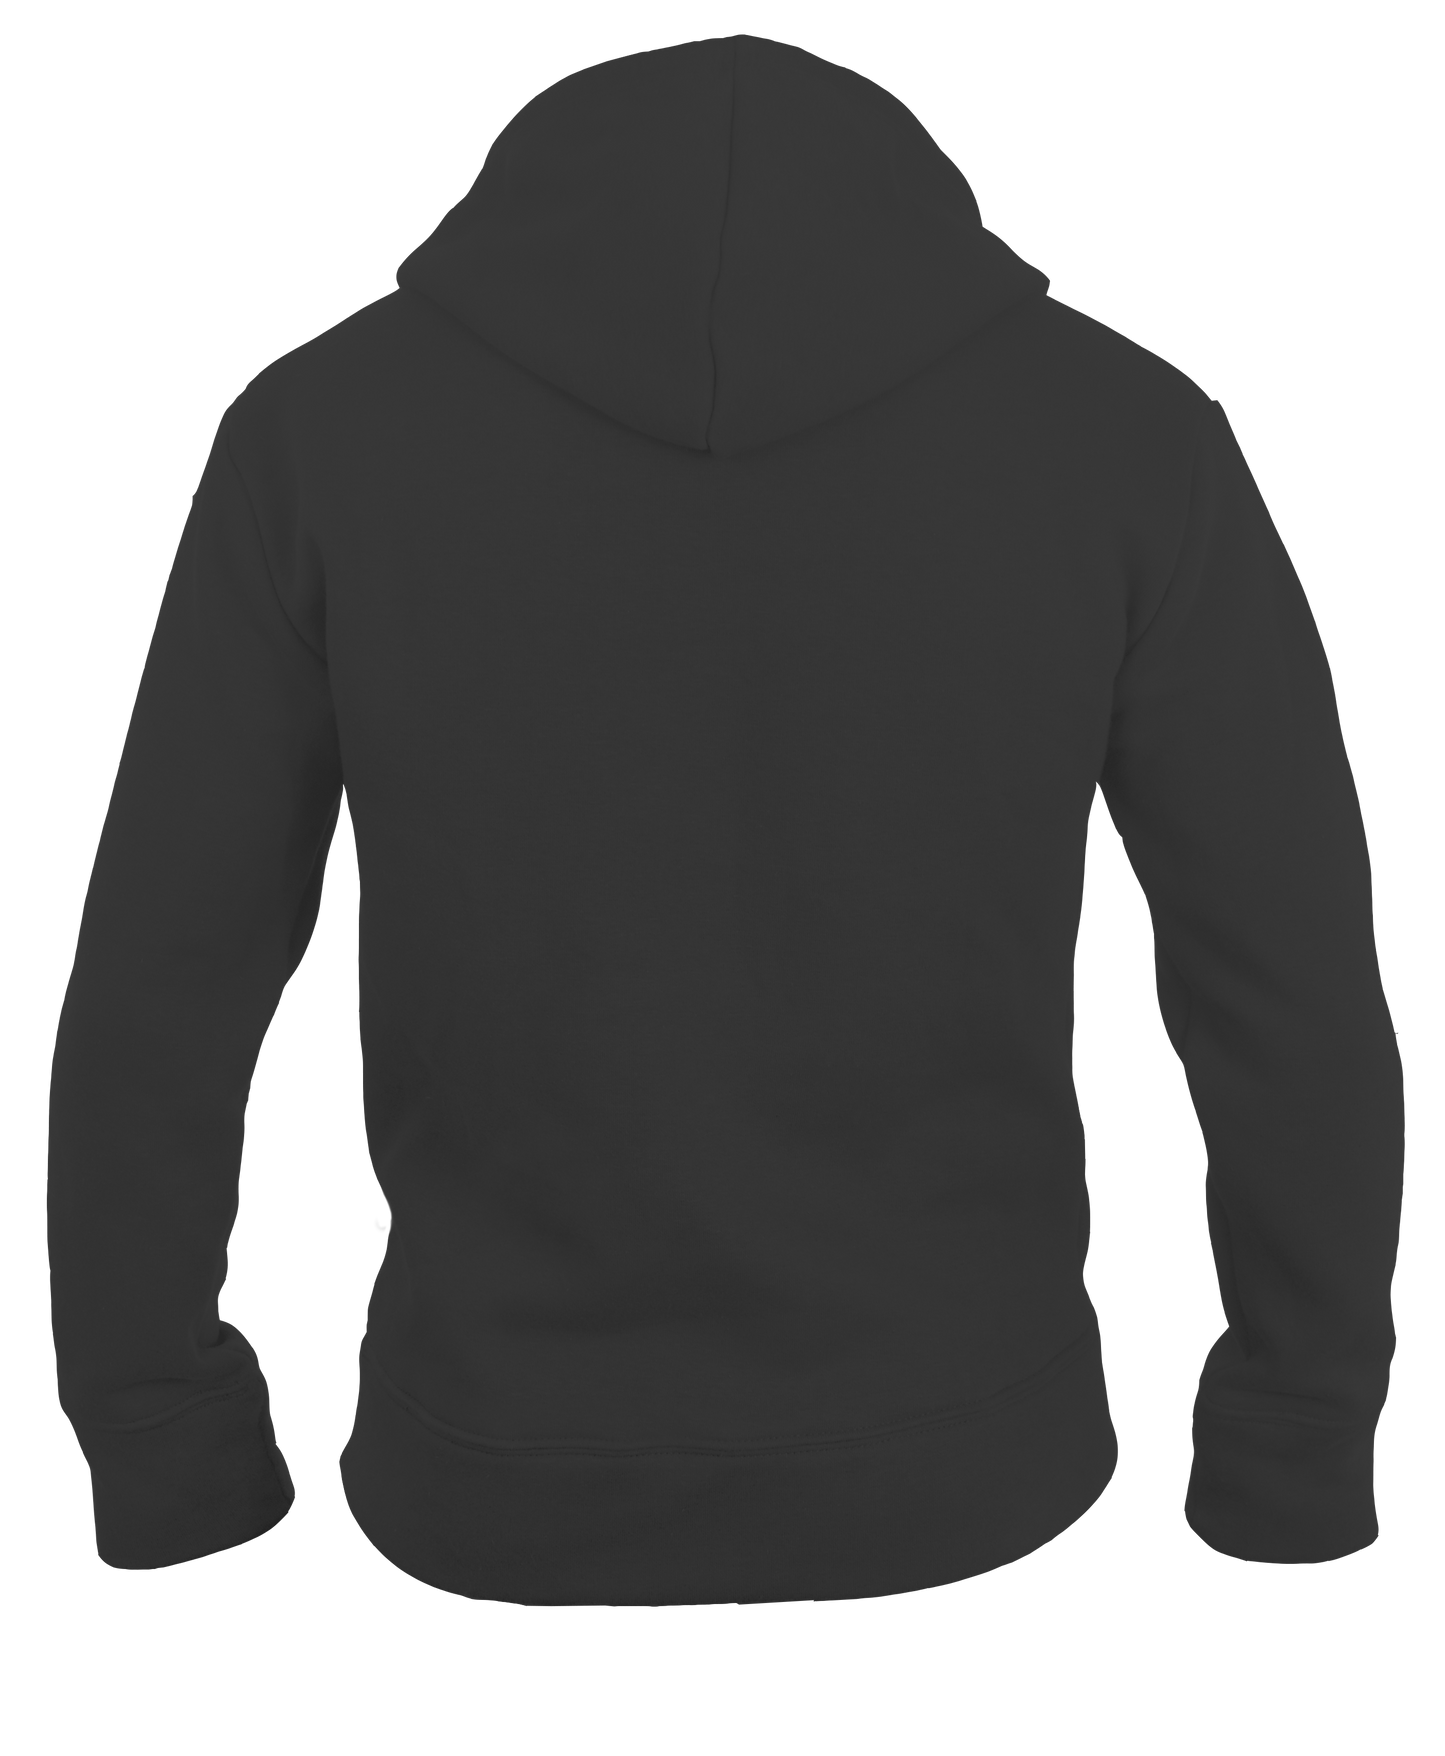 Hoodie lifestyle GRIS OSCURO